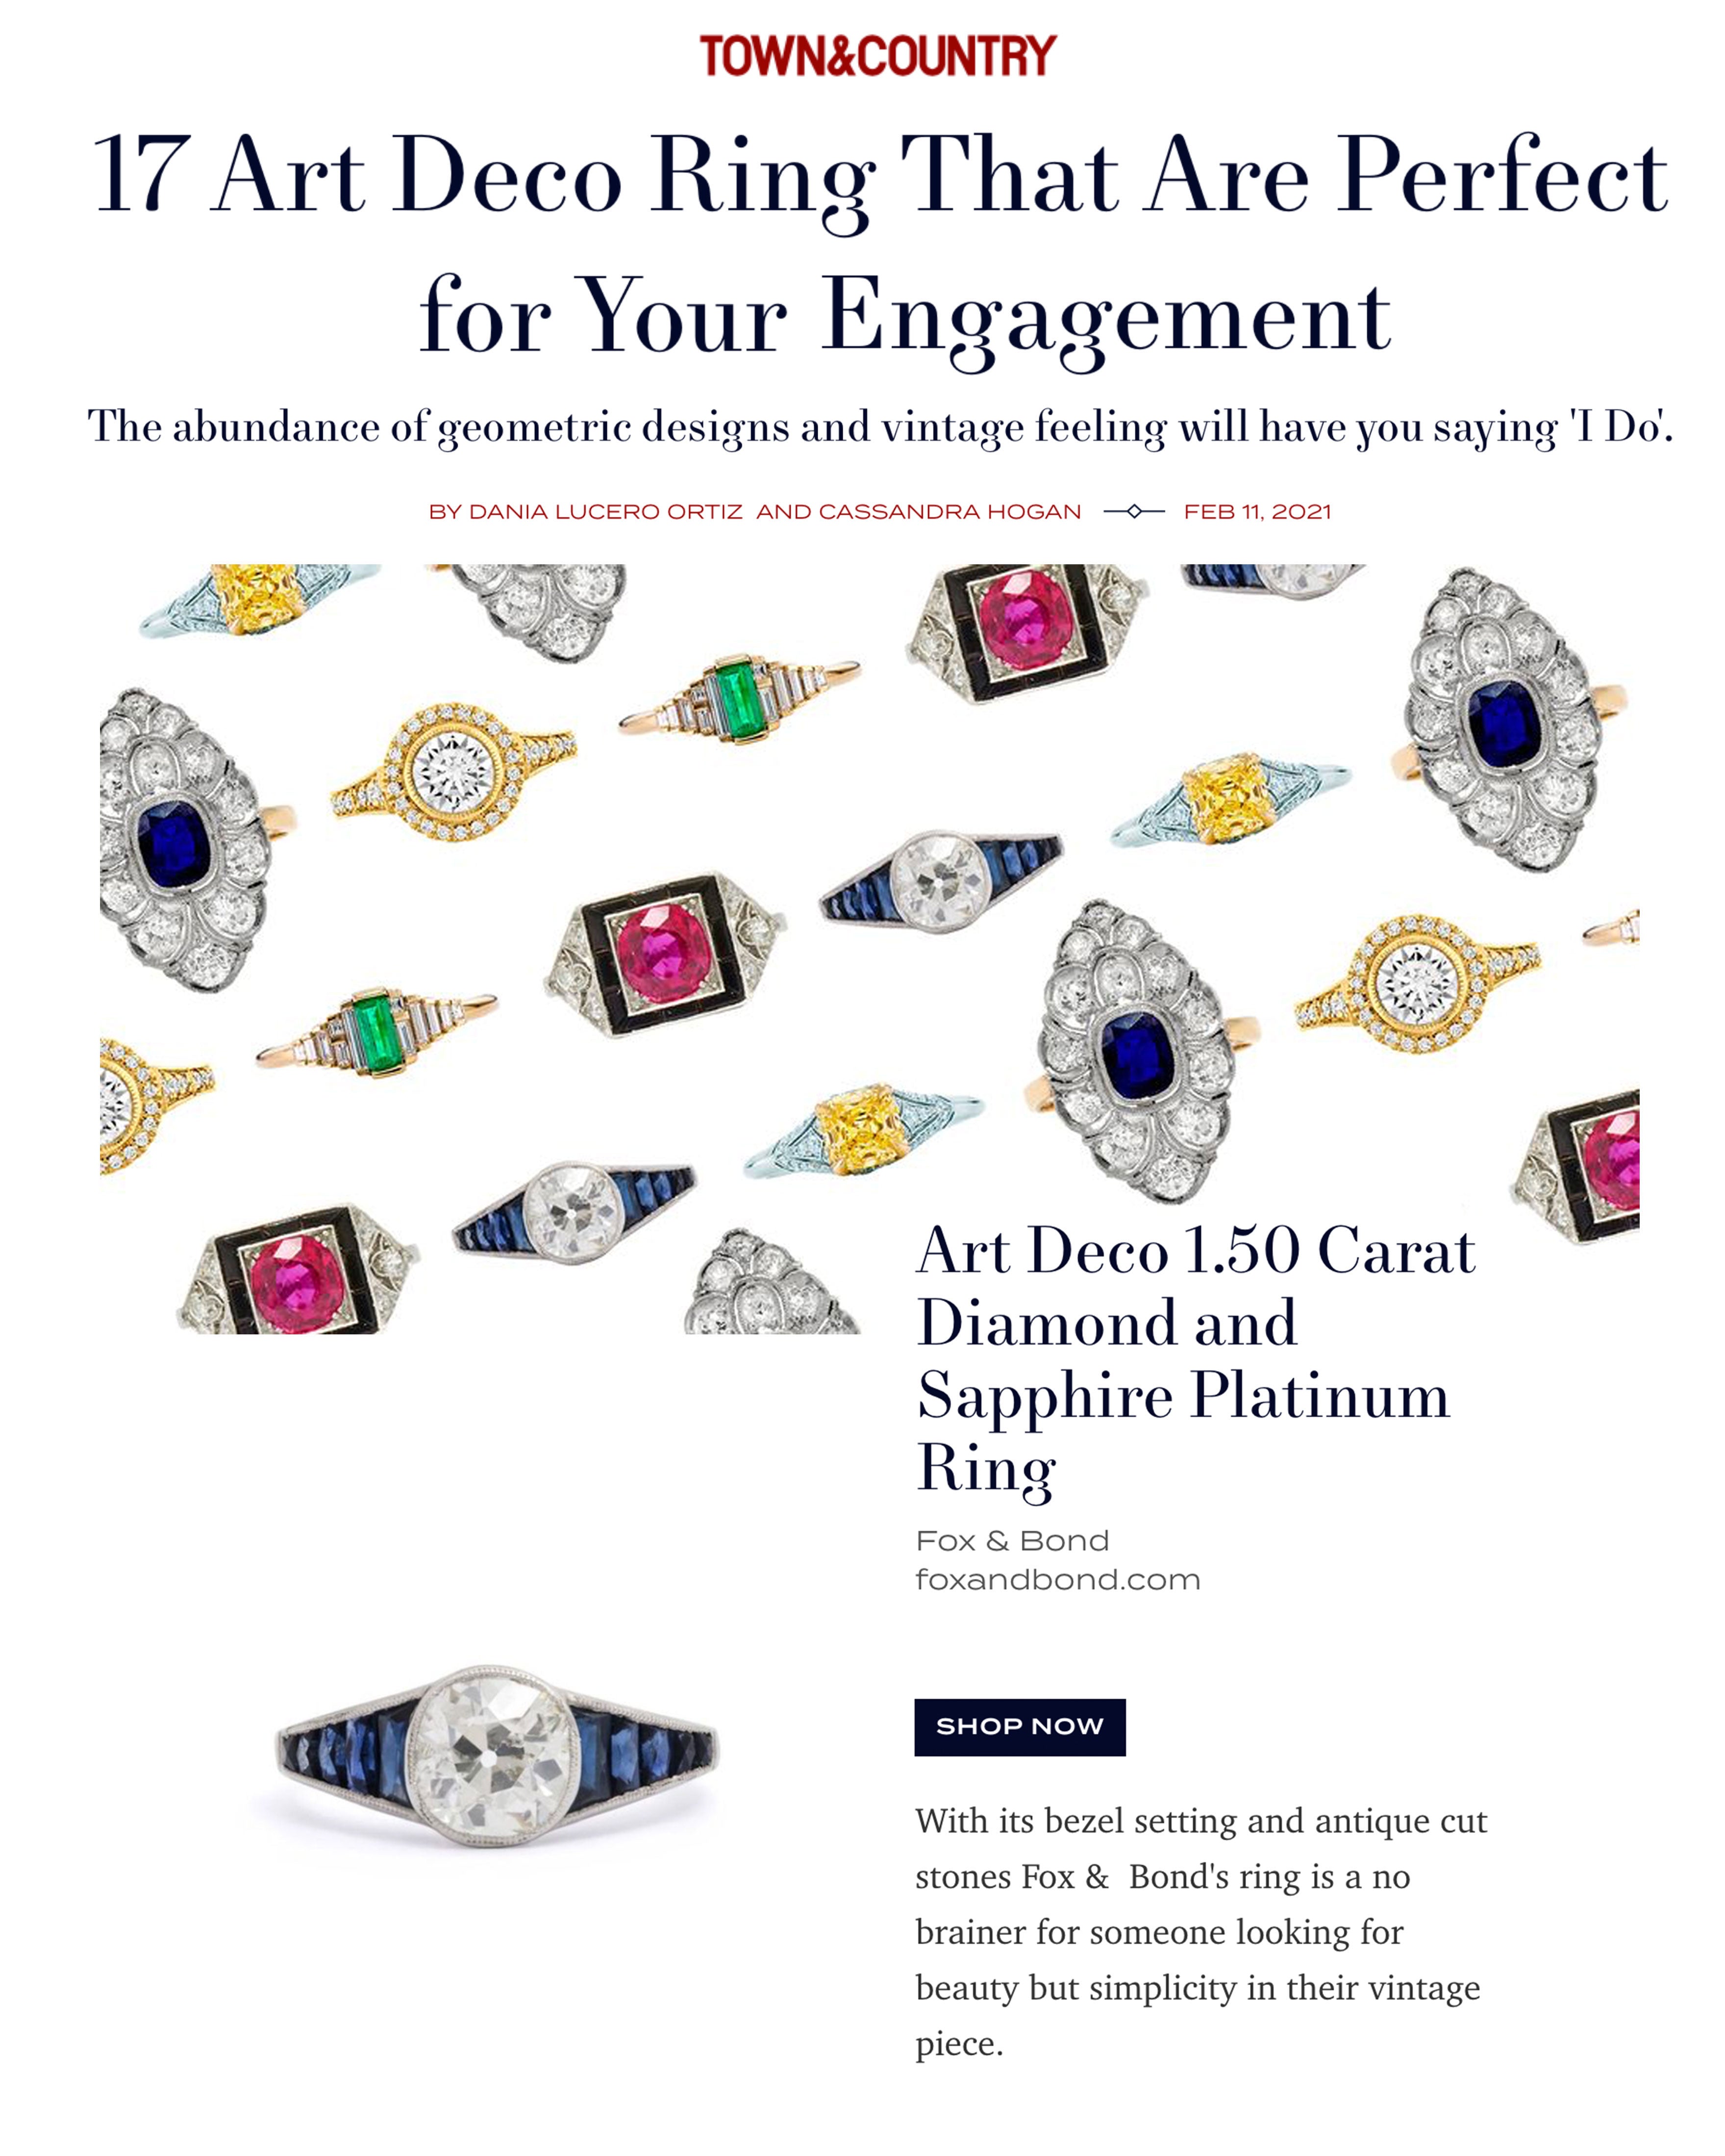 Town & Country: 17 Art Deco Ring That Are Perfect for Your Engagement